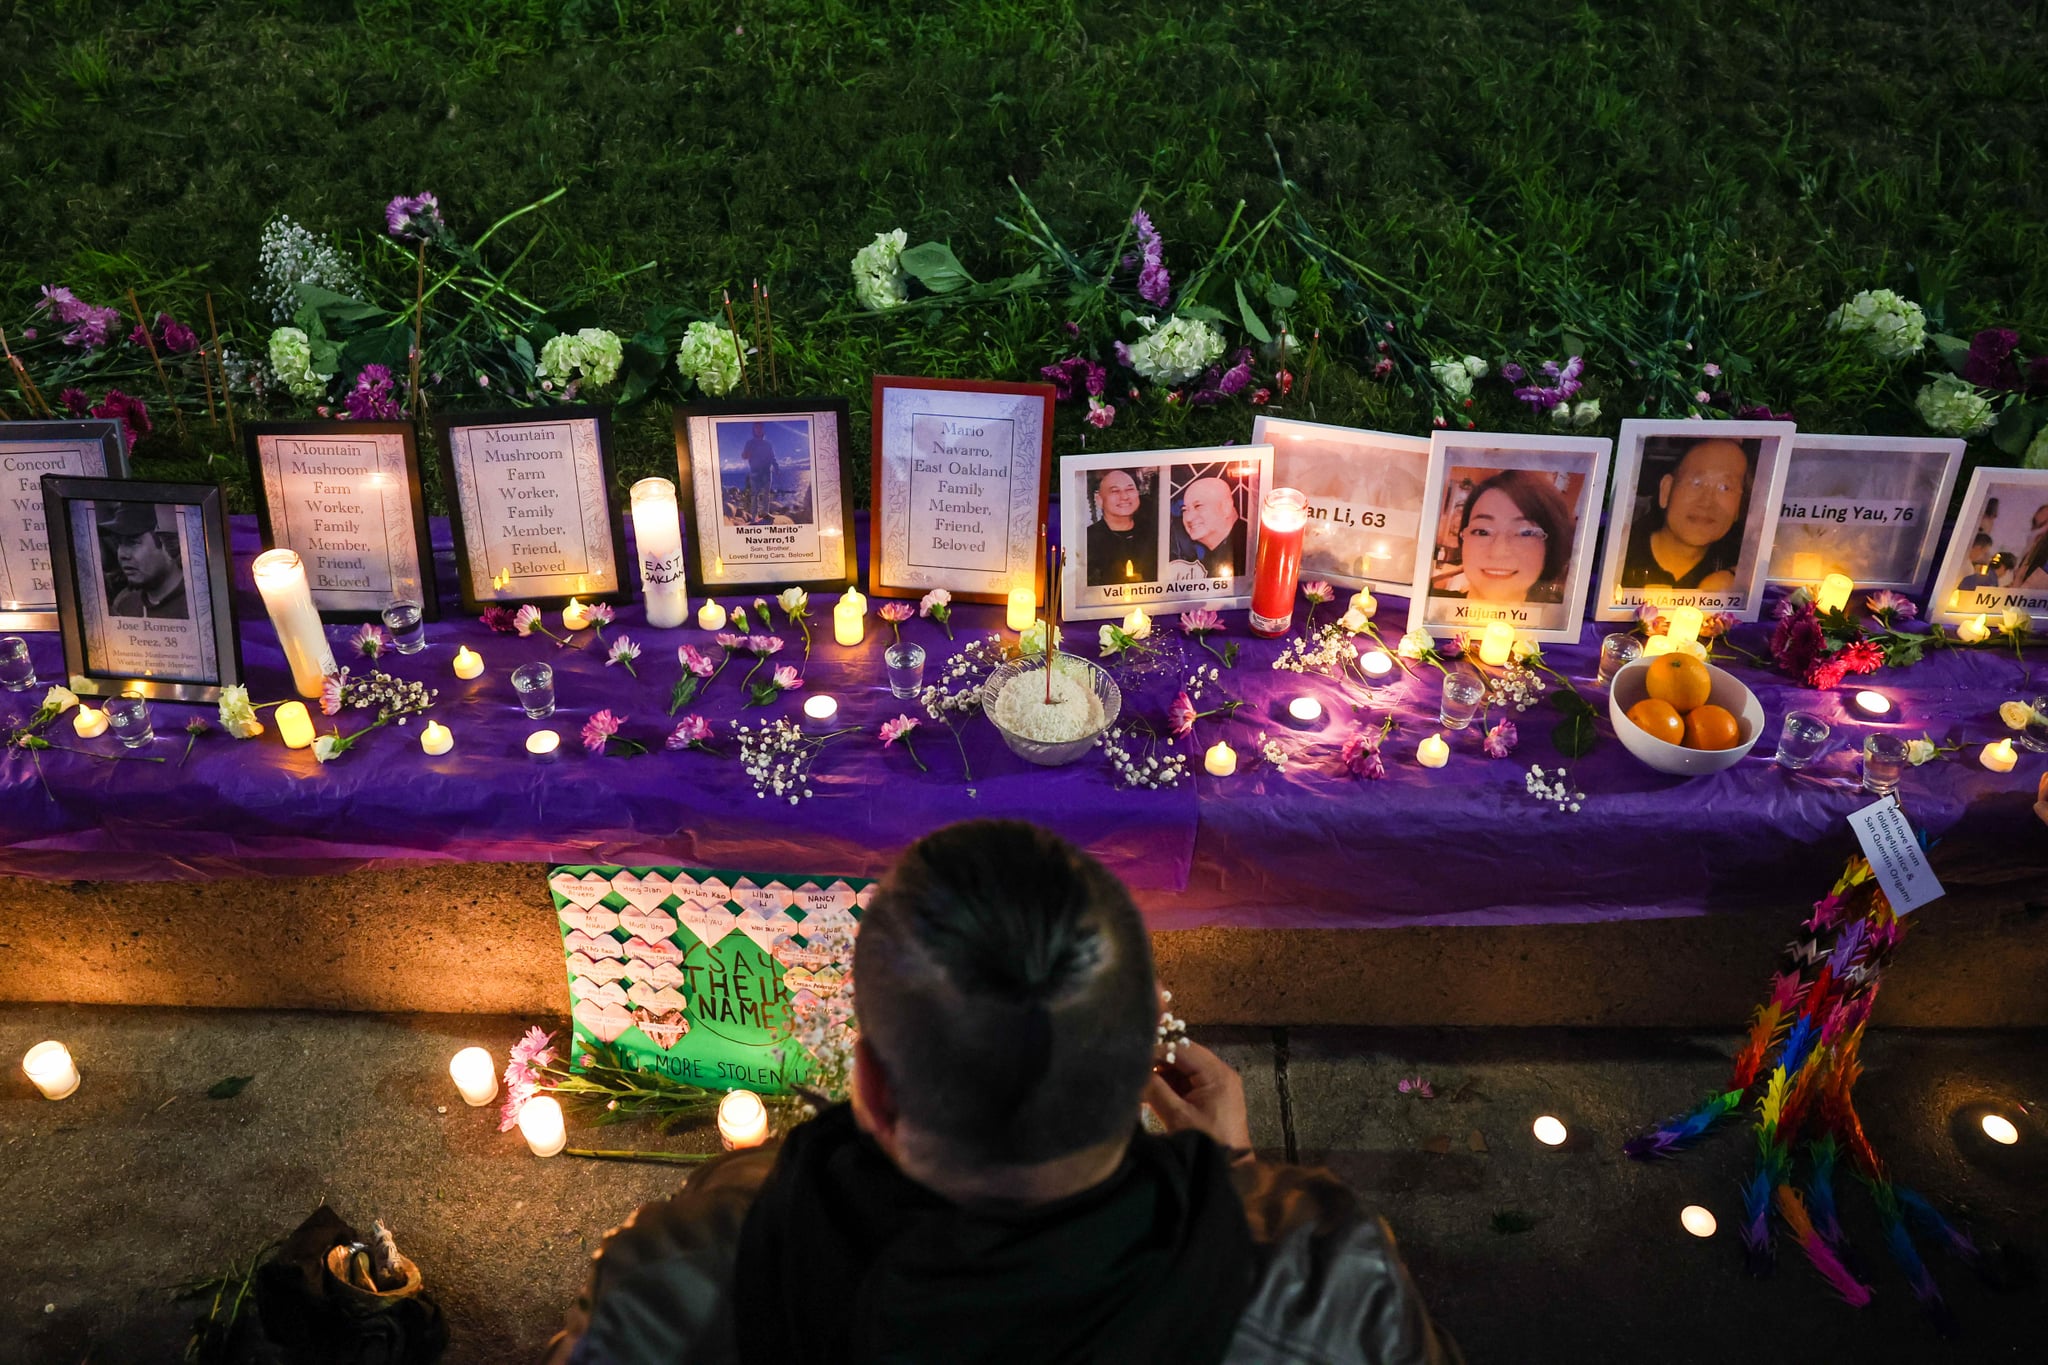 OAKLAND, CALIFORNIA - JANUARY 25: Dr. Cesar Cruz, founder of Homies  Empowerment, pays respects as he decorate a makeshift memorial during a candlelight vigil in honor to the mass shooting victims of the Monterey Park, Half Moon Bay and East Oakland and remember the latest victims of gun violence at Wilma Chan Park in Oakland, Calif., on Wednesday, Jan. 25, 2023. The event was organized by Asian Americans and Pacific Islanders for Civic Empowerment Education Fund. (Photo by Ray Chavez/MediaNews Group/The Mercury News via Getty Images)